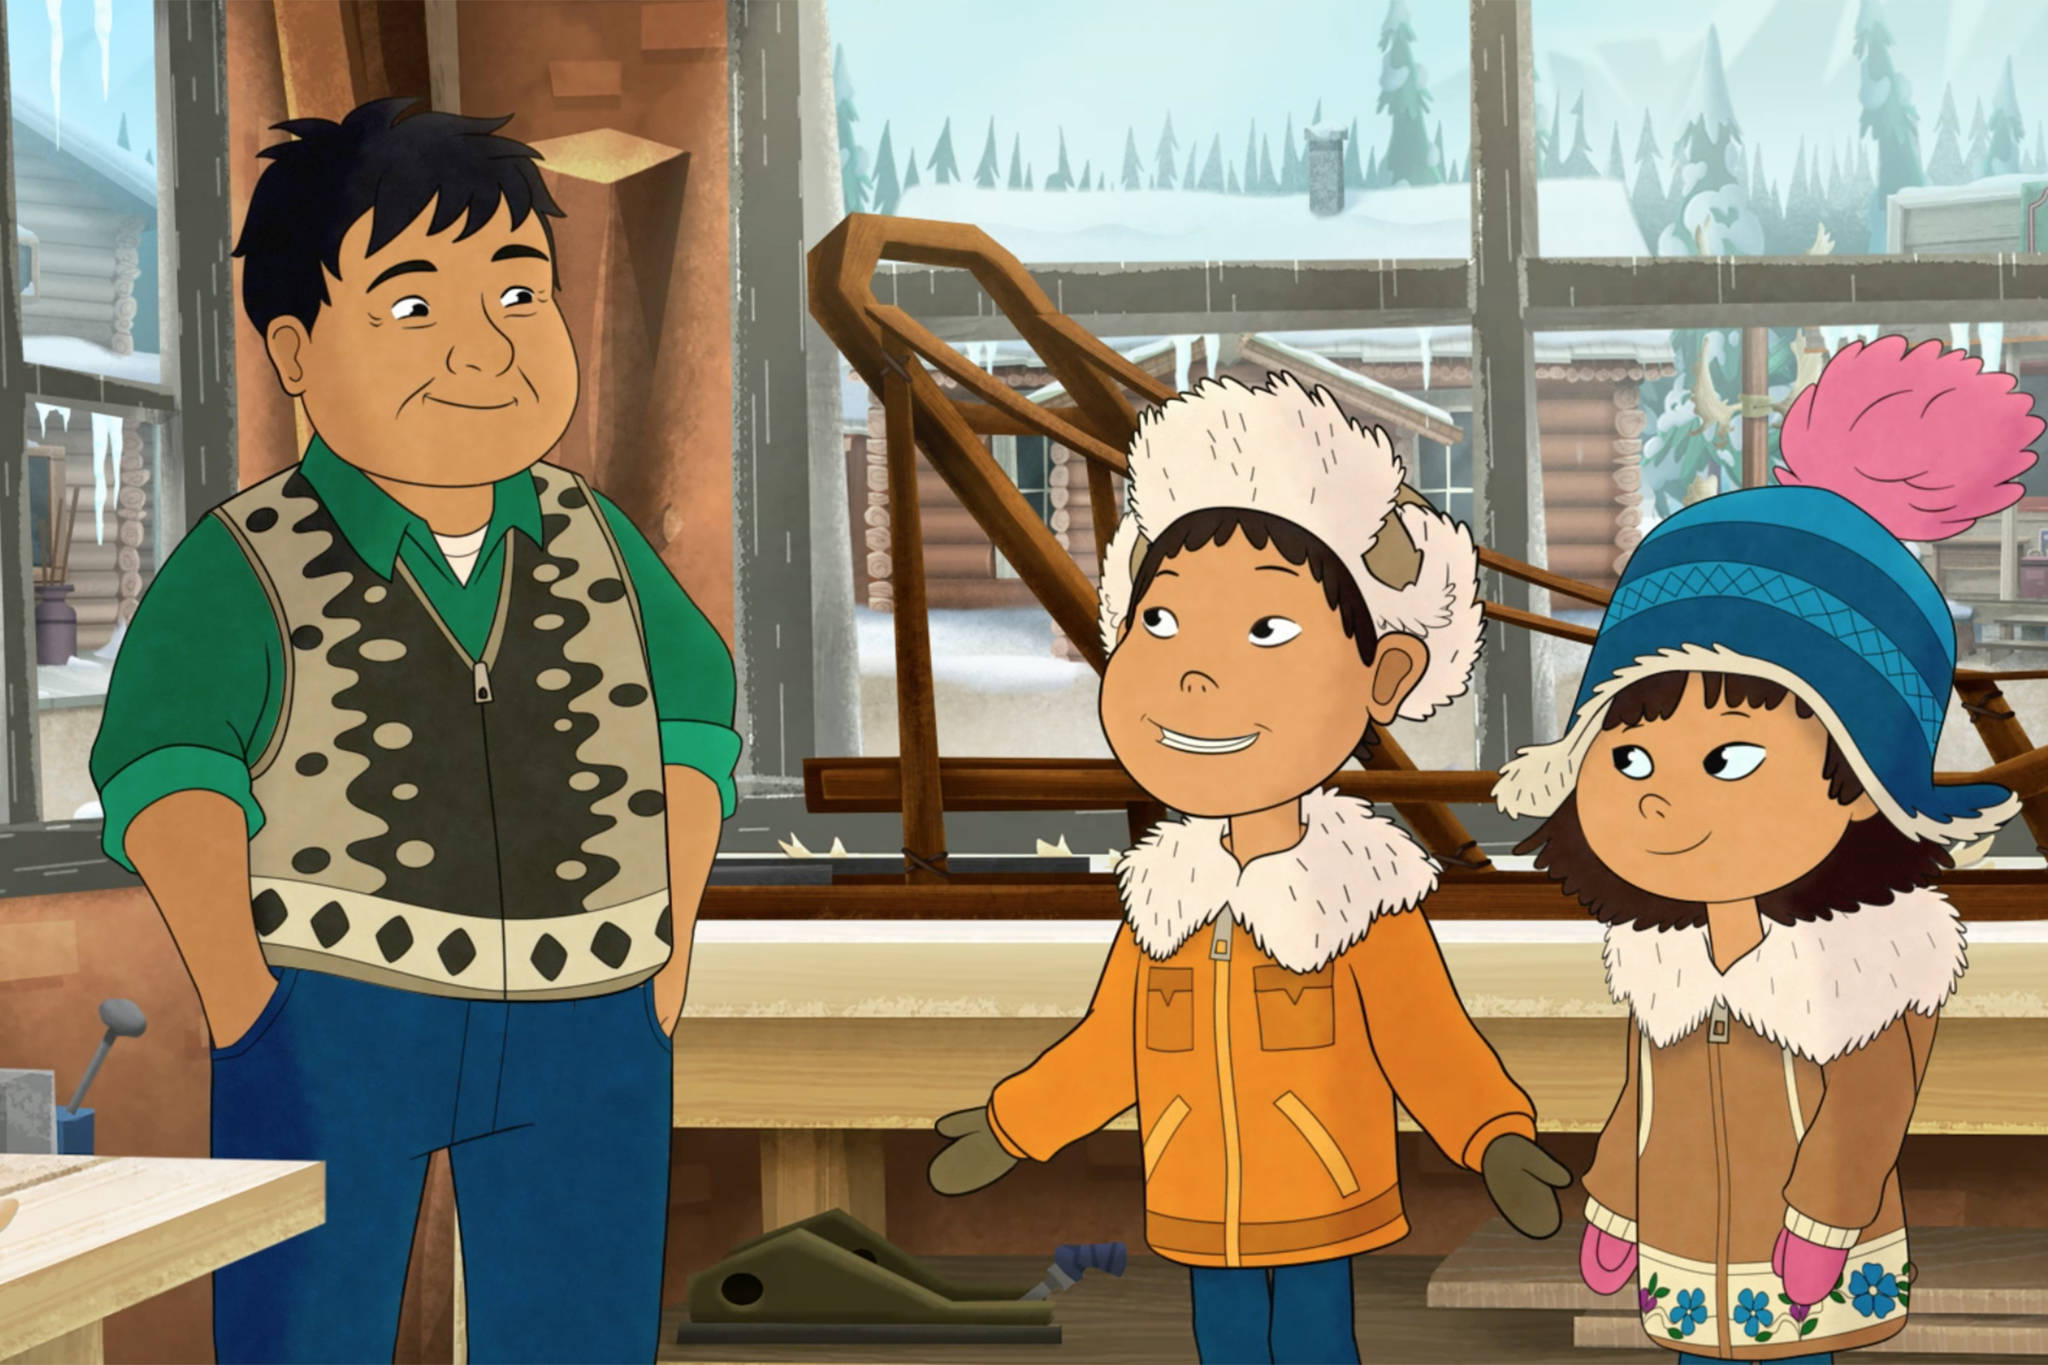 Upcoming PBS children’s series “Molly of Denali” will be the focus of the Evening at Egan lecture Friday. (Courtesy photo | (c) 2018 WGBH Educational Foundation)